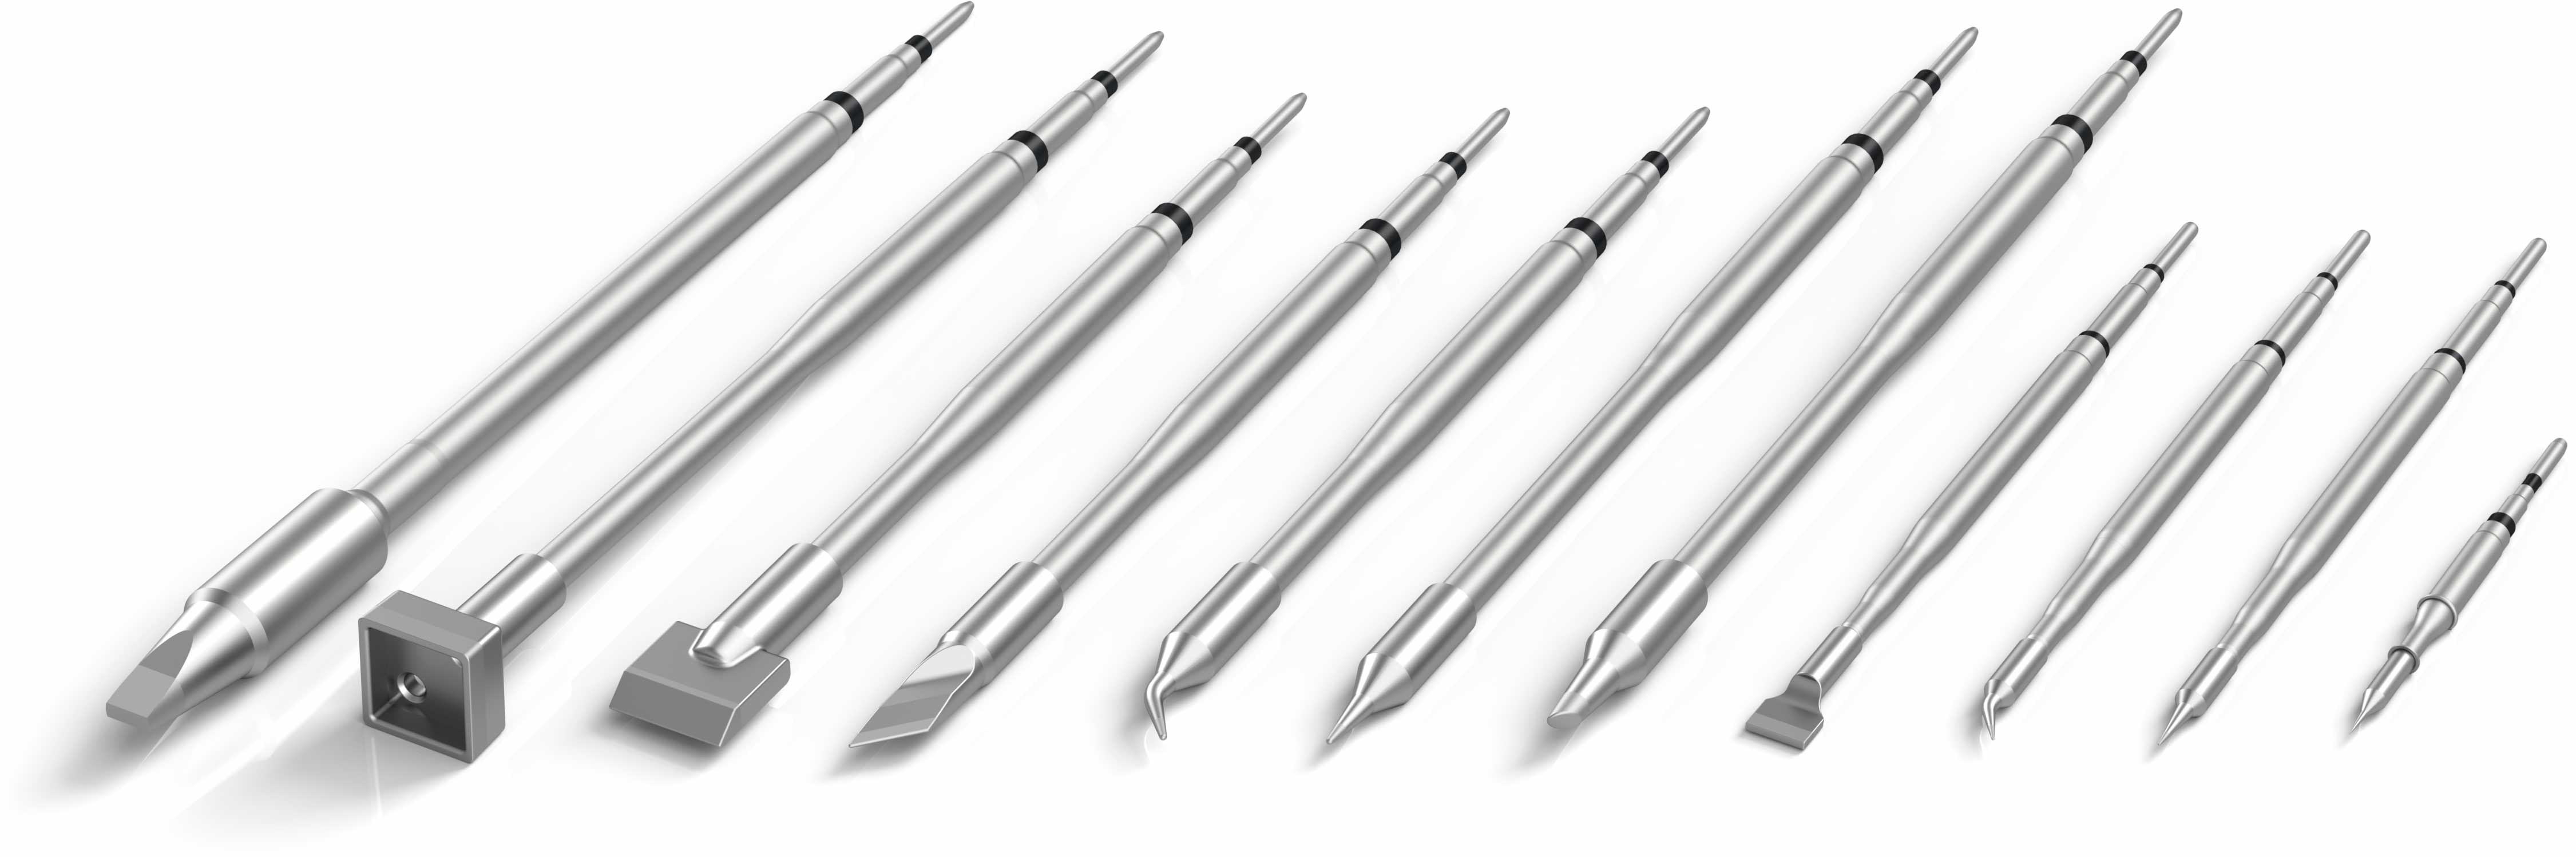 Selection Of The Right Soldering Tip